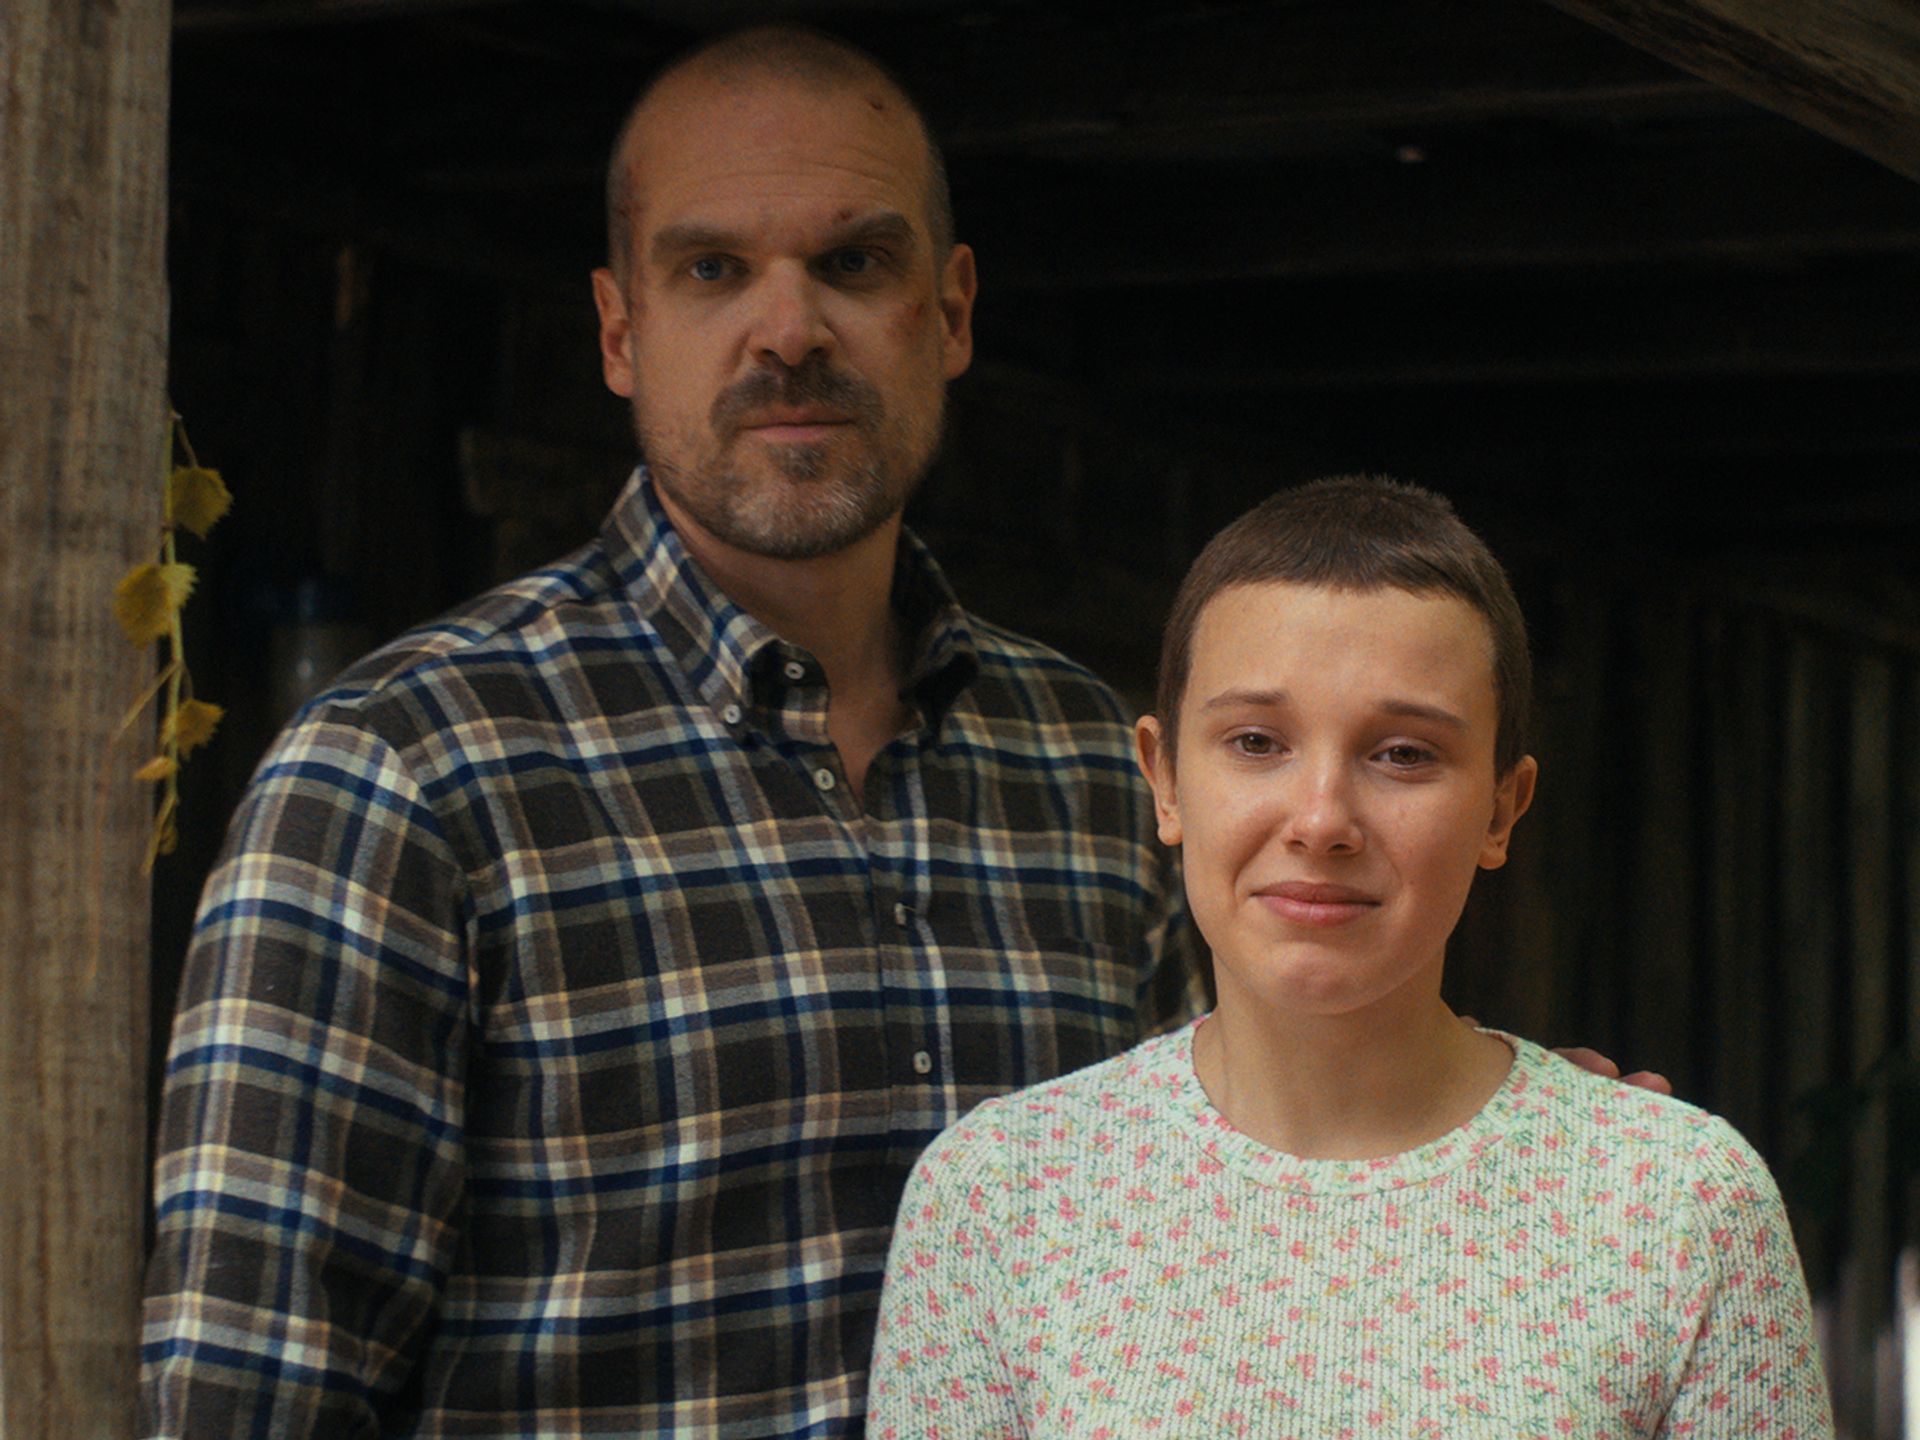 Stranger Things season 4 teaser reveals drama for Eleven and Will